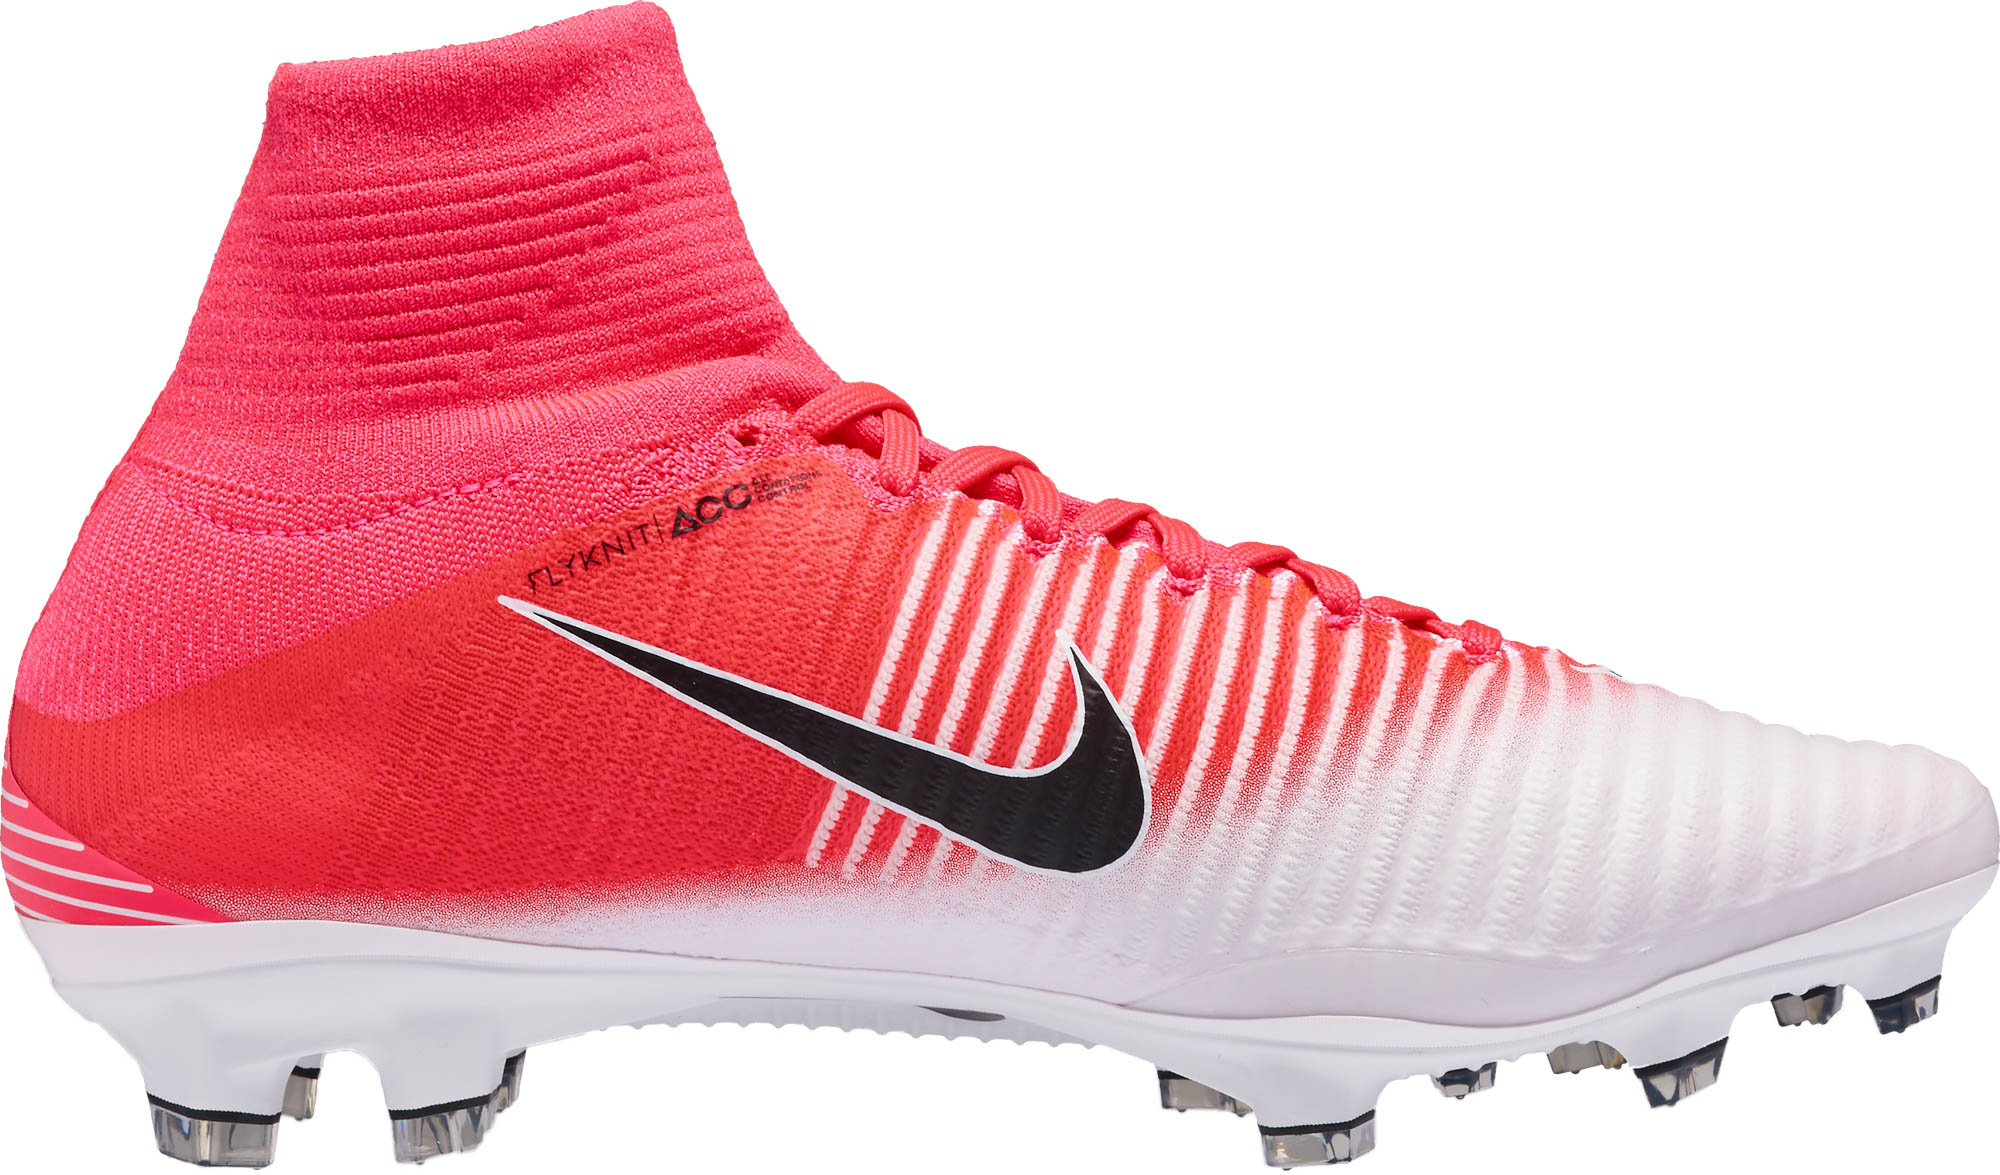 mercurial superfly v fg pink and white